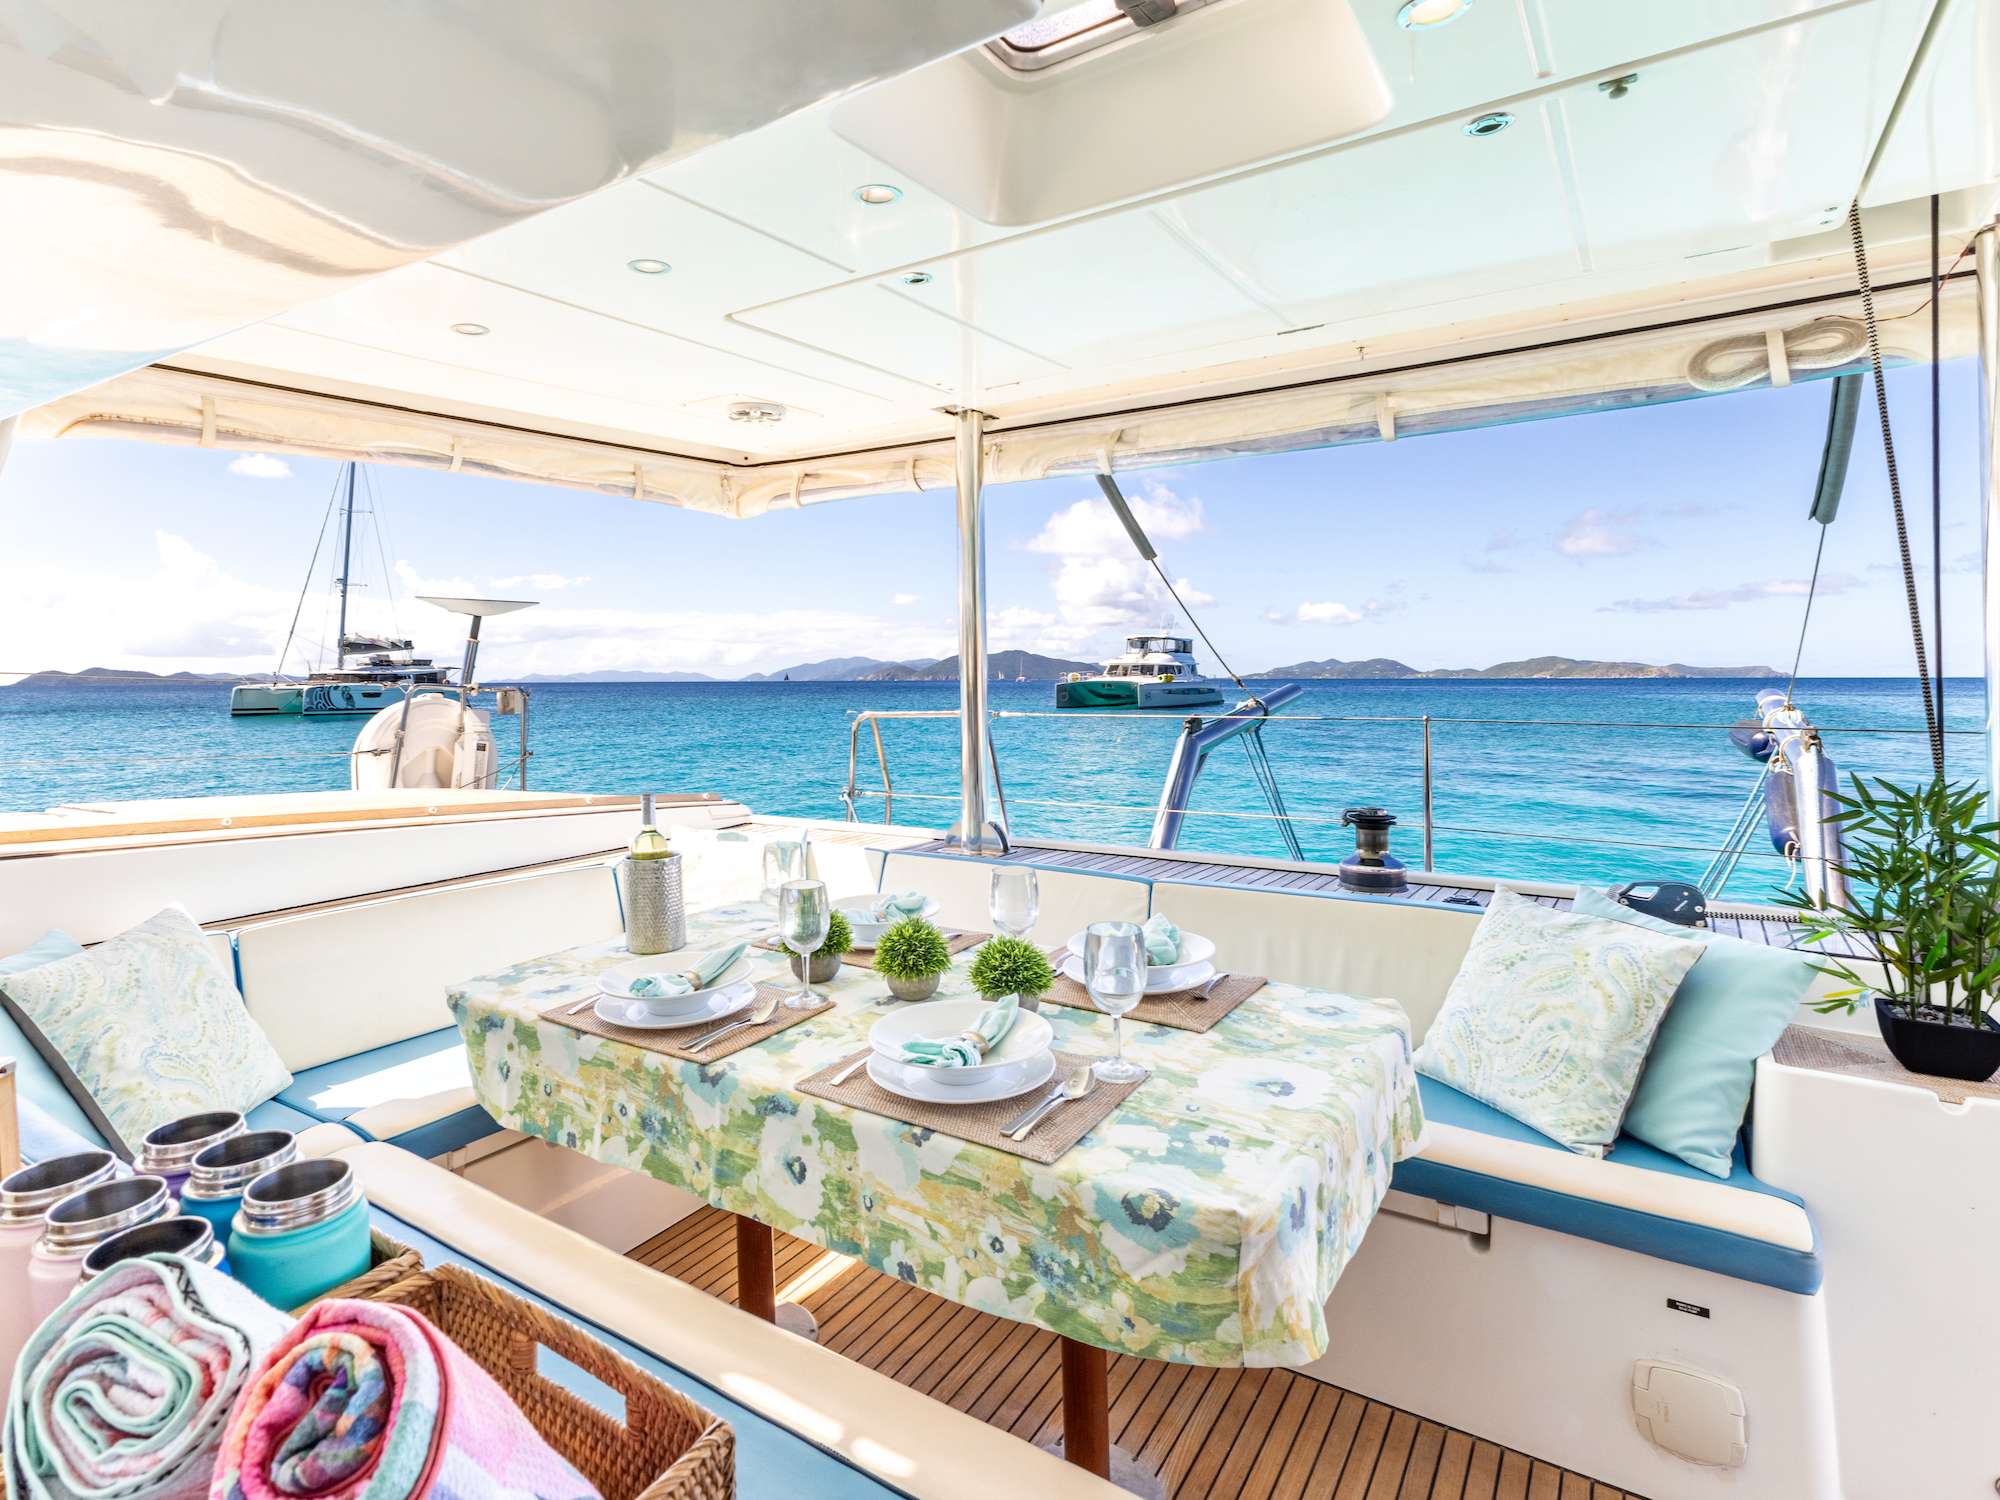 GAMBIT Yacht Charter - Gambit has a spacious, comfortable saloon, the perfect place to set up a game or puzzle, catch up on reading or work on your laptop should the office call.